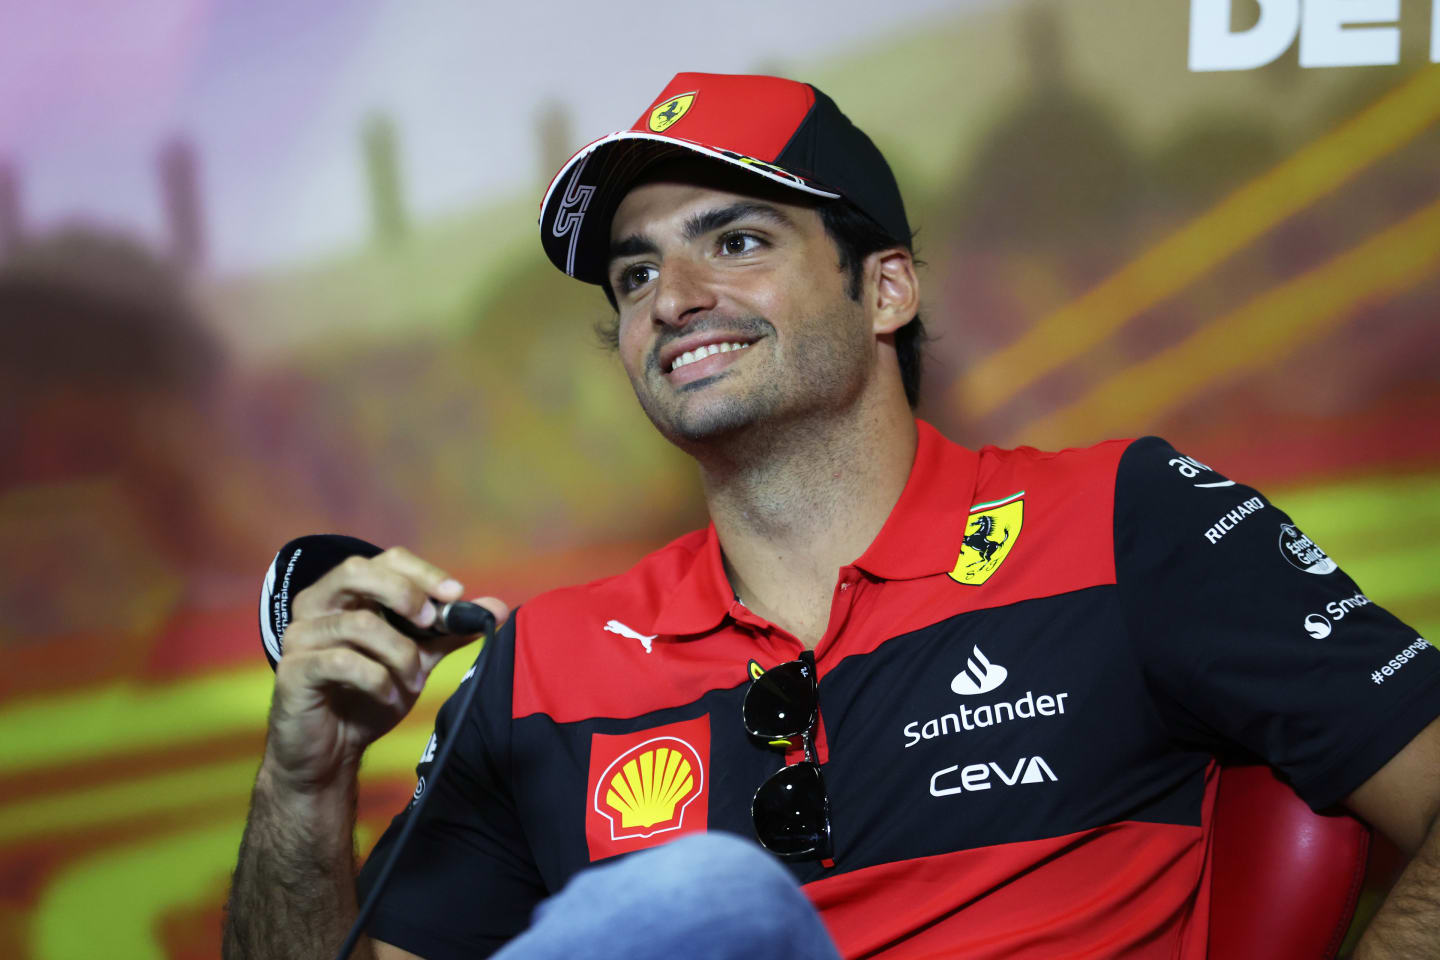 BARCELONA, SPAIN - MAY 20: Carlos Sainz of Spain and Ferrari looks on in the Drivers Press Conference prior to practice ahead of the F1 Grand Prix of Spain at Circuit de Barcelona-Catalunya on May 20, 2022 in Barcelona, Spain. (Photo by Bryn Lennon/Getty Images)